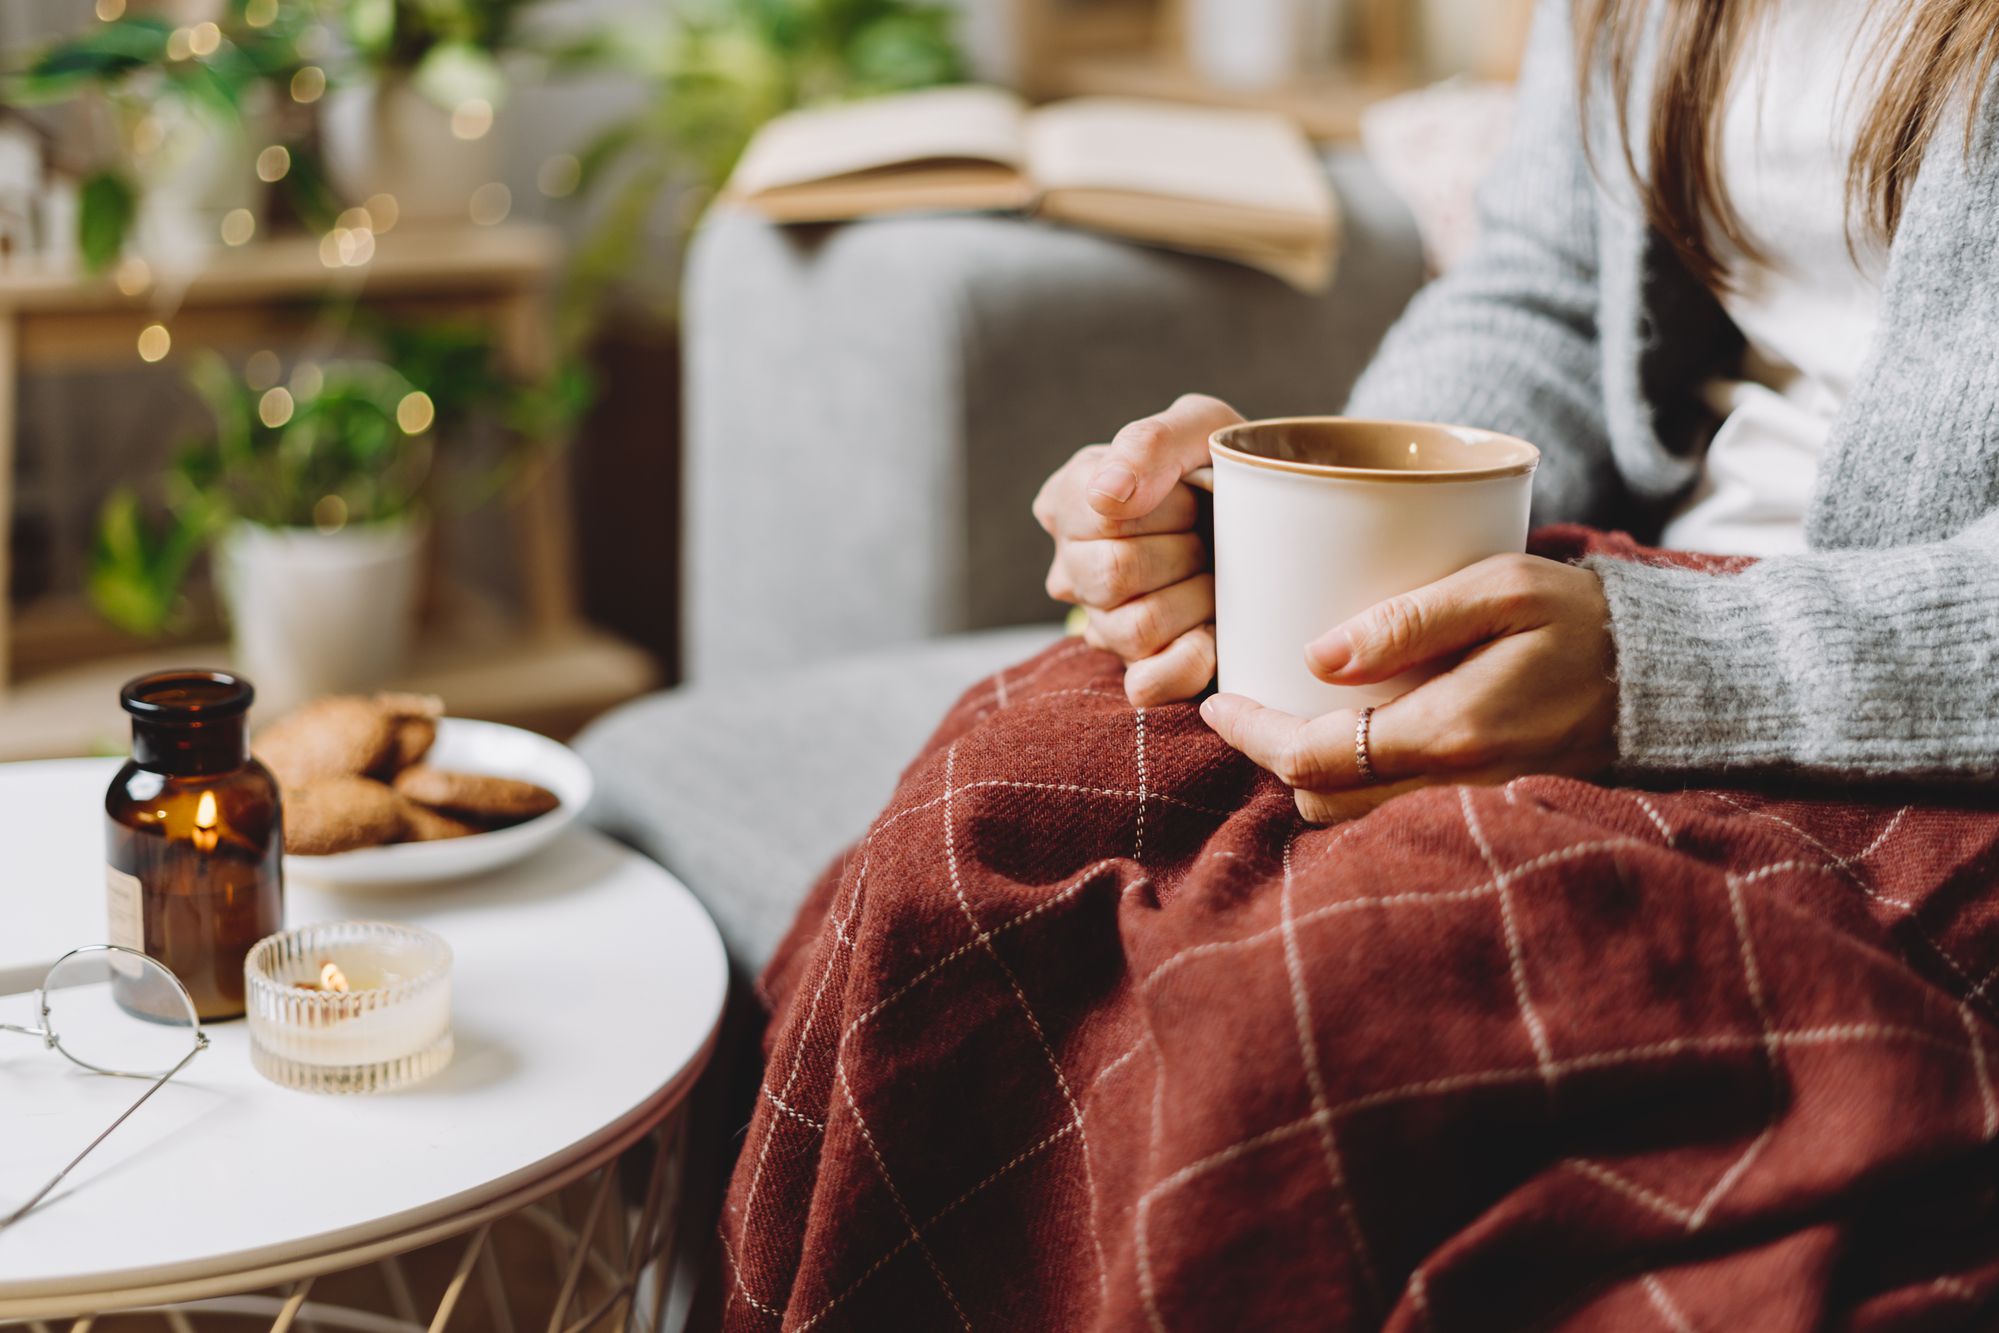 <p><a href="https://montanahappy.com/what-is-hygge/">Hygge</a> is all the rage, but what types of comforting drinks can help you transition into this mindset this time of year? Here are 15 comforting drinks that will help you relax and enjoy the “ber” month one sip at a time.</p>